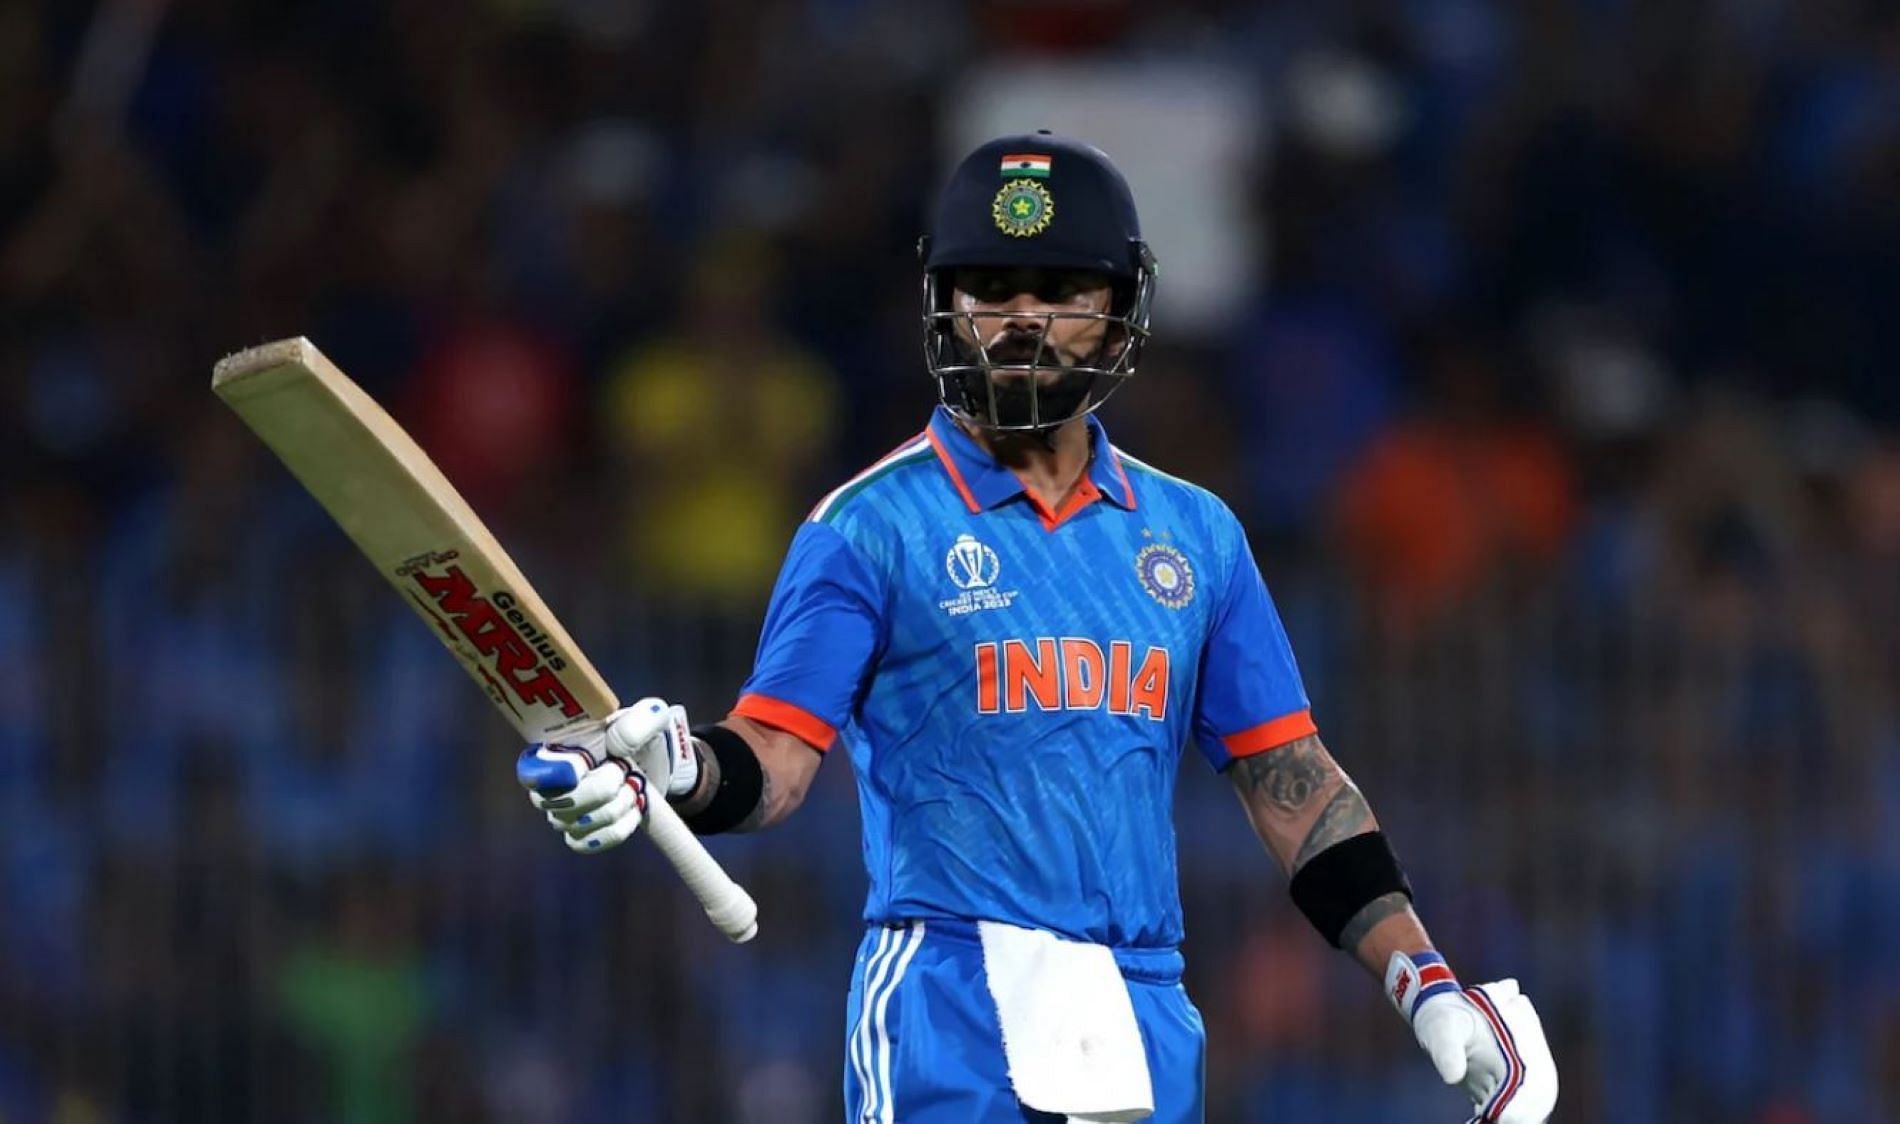 Virat Kohli rescued India yet again from dire straits in a run chase